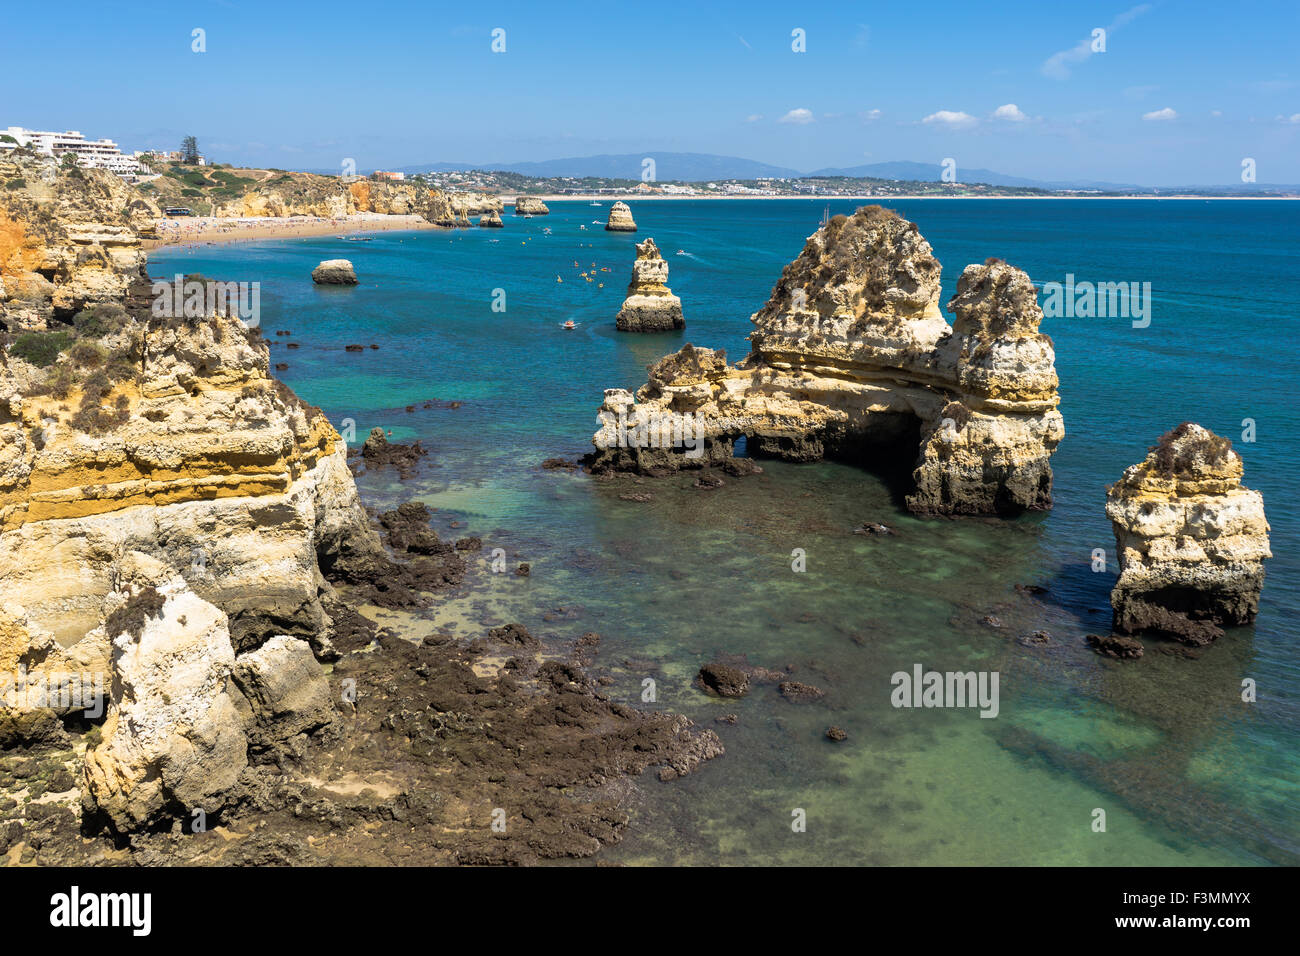 Aerial view of the famous beach harbor and rock in Portgual's Algarve region. August, 2015. Stock Photo